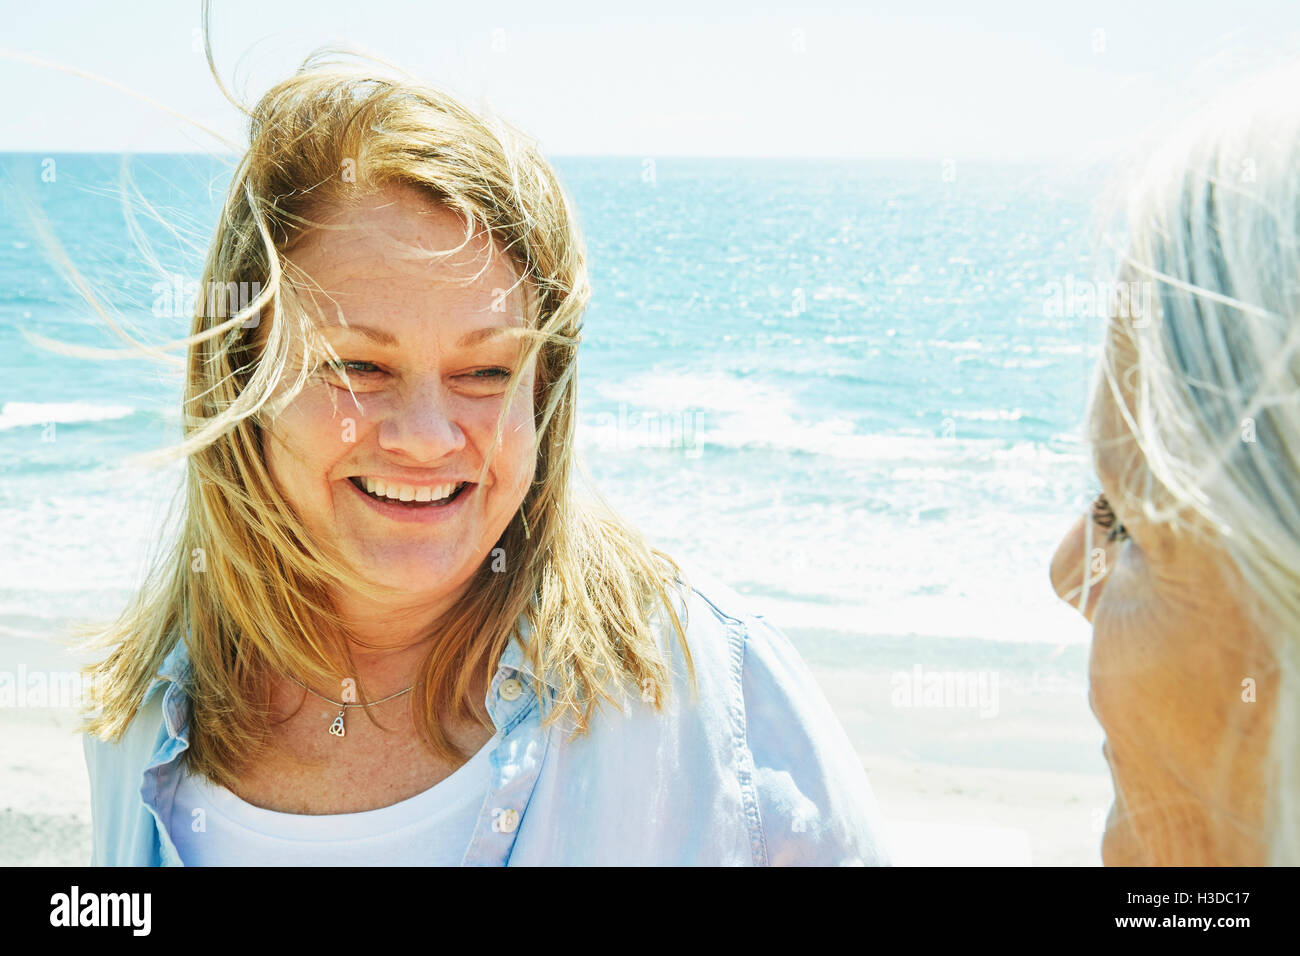 Smiling blond mature women standing by the ocean. Stock Photo